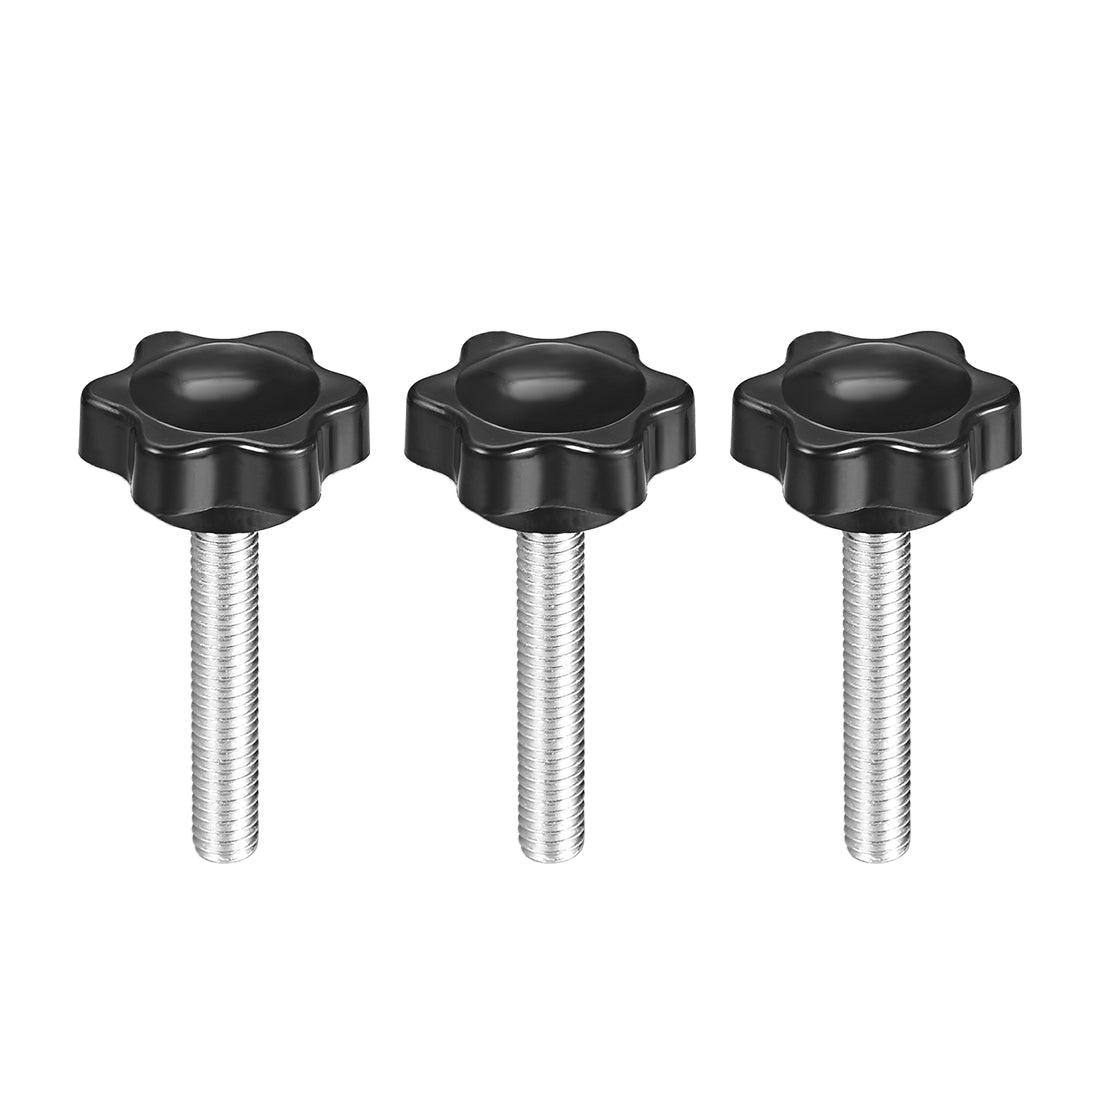 uxcell Uxcell Clamping Handle Gripandles Screw Knobs Handgrips Star Knob  Male Thread 3 pcs